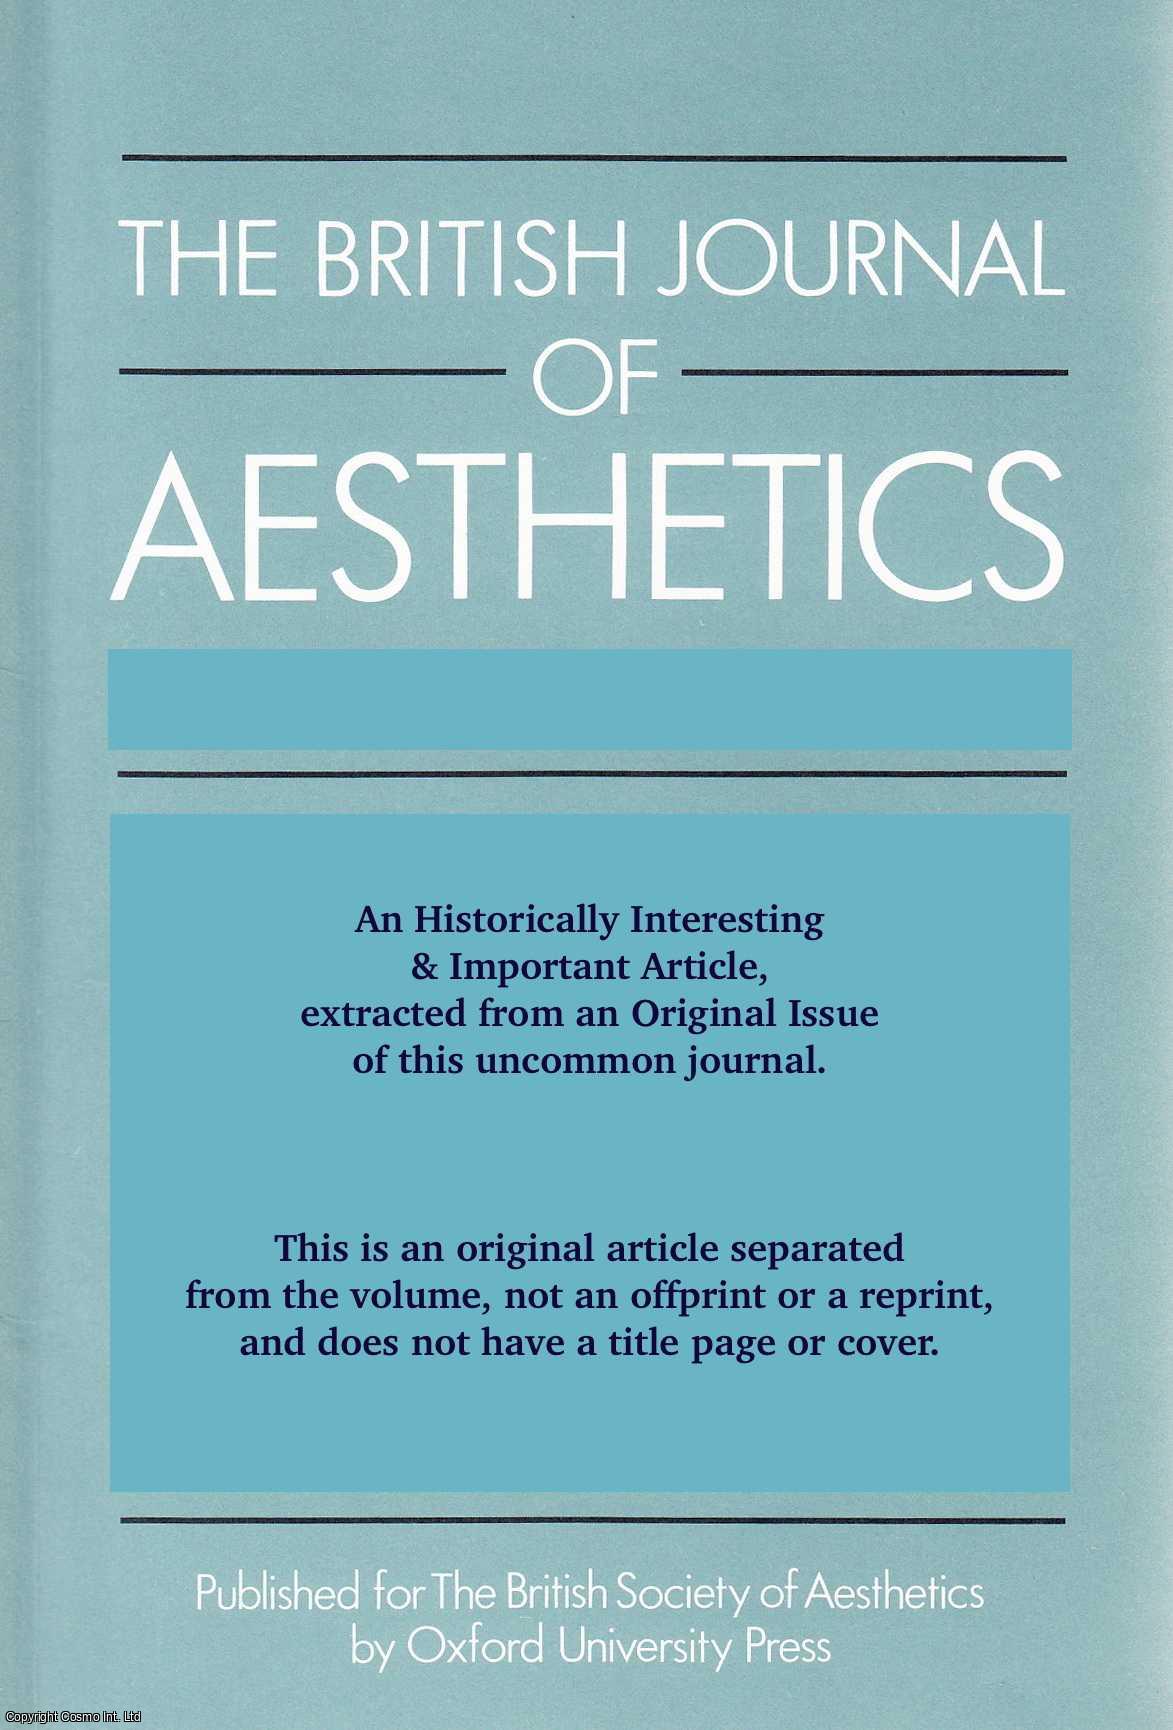 T.R. Martland - Art and Craft: The Distinction. An original article from the British Journal of Aesthetics, 1974.